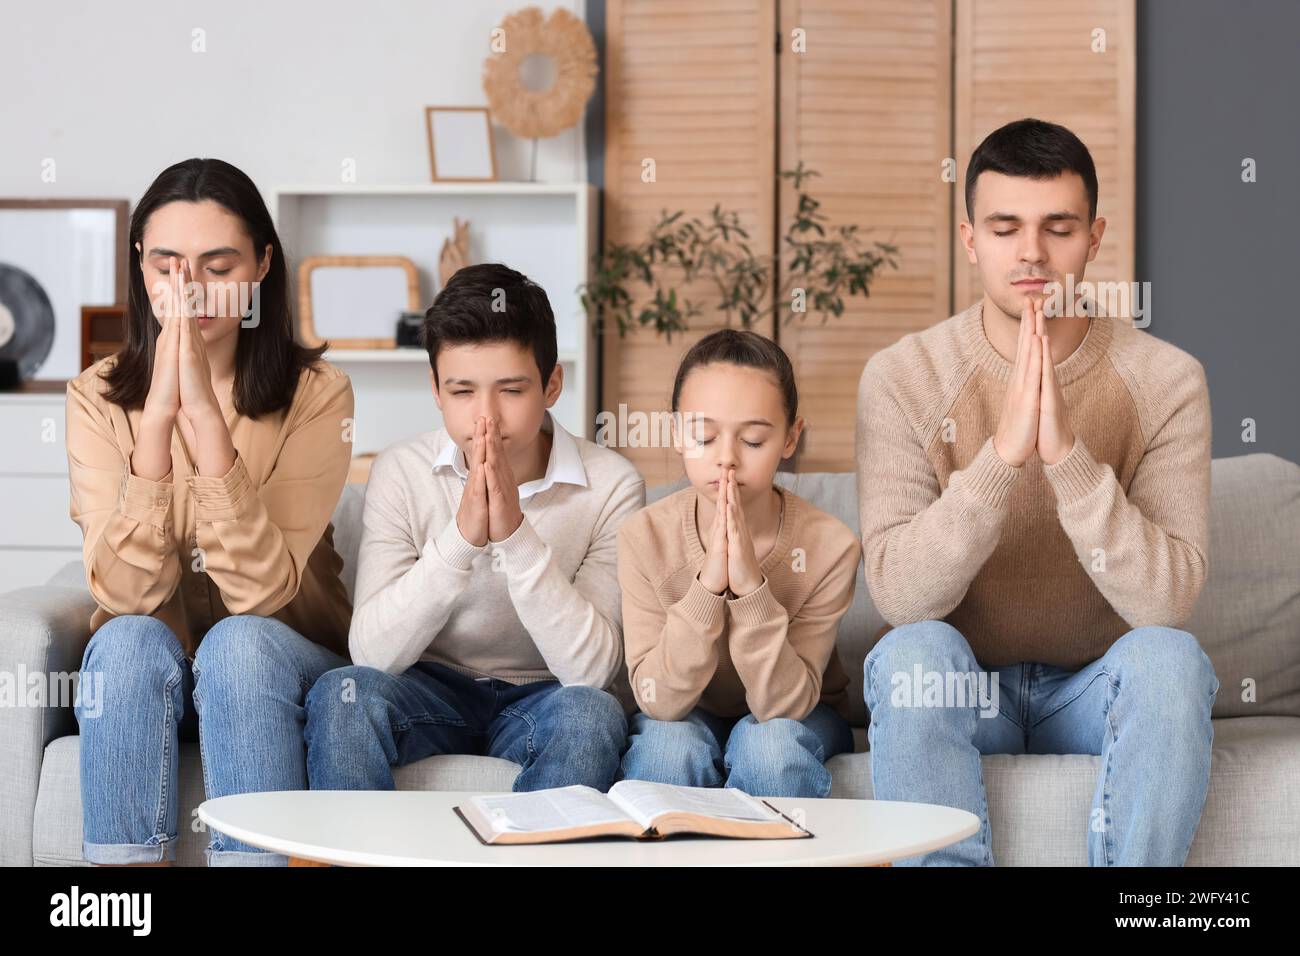 Family praying together on sofa at home Stock Photo